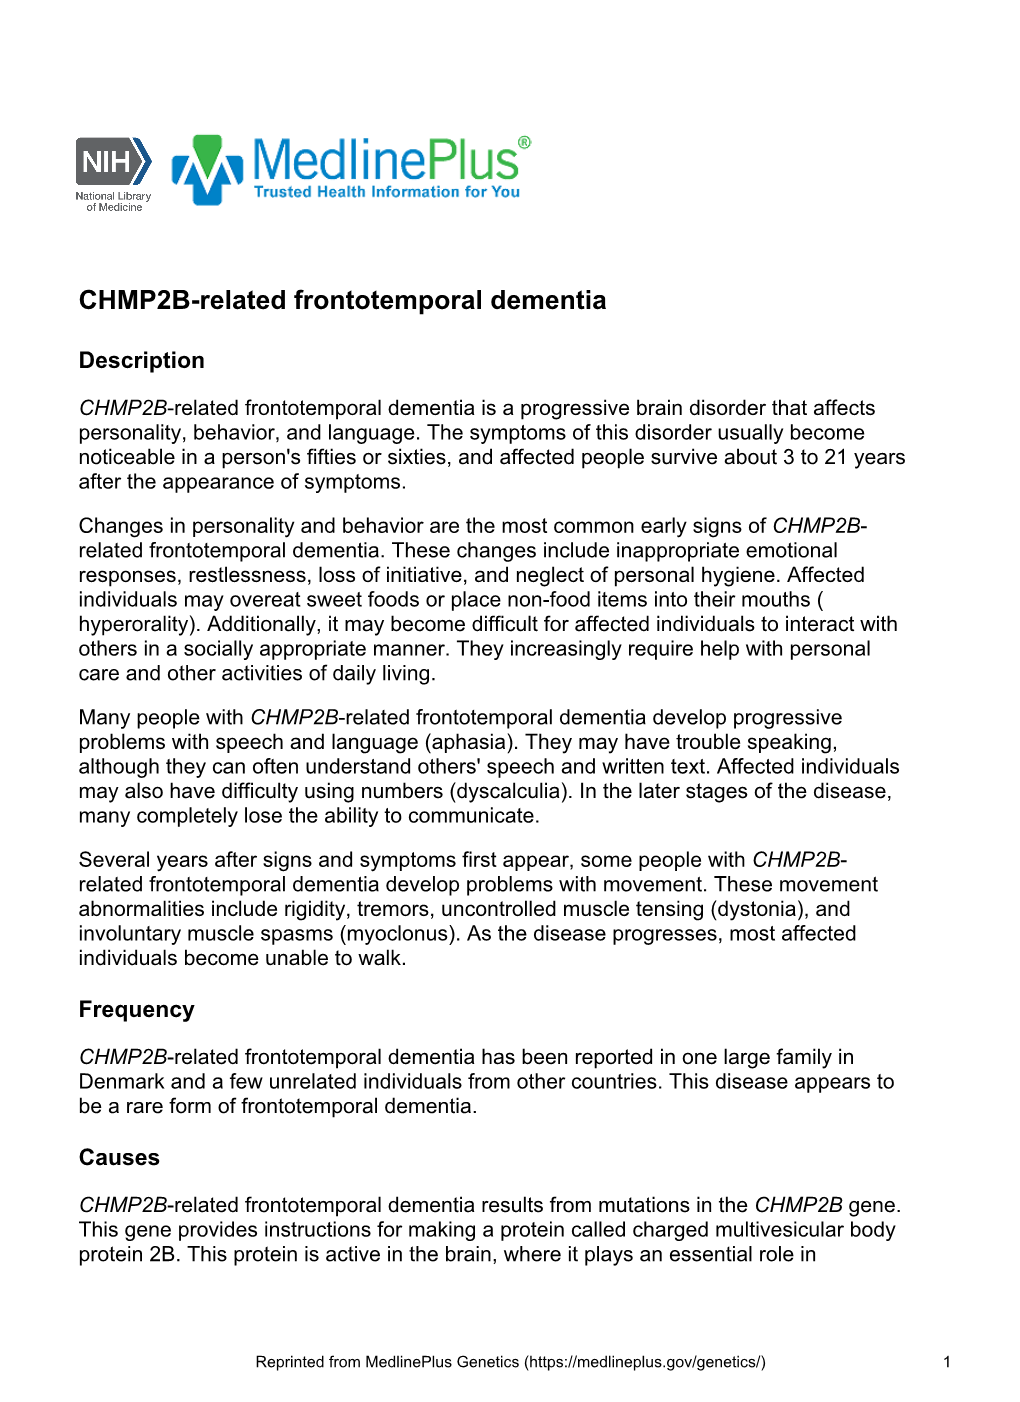 CHMP2B-Related Frontotemporal Dementia